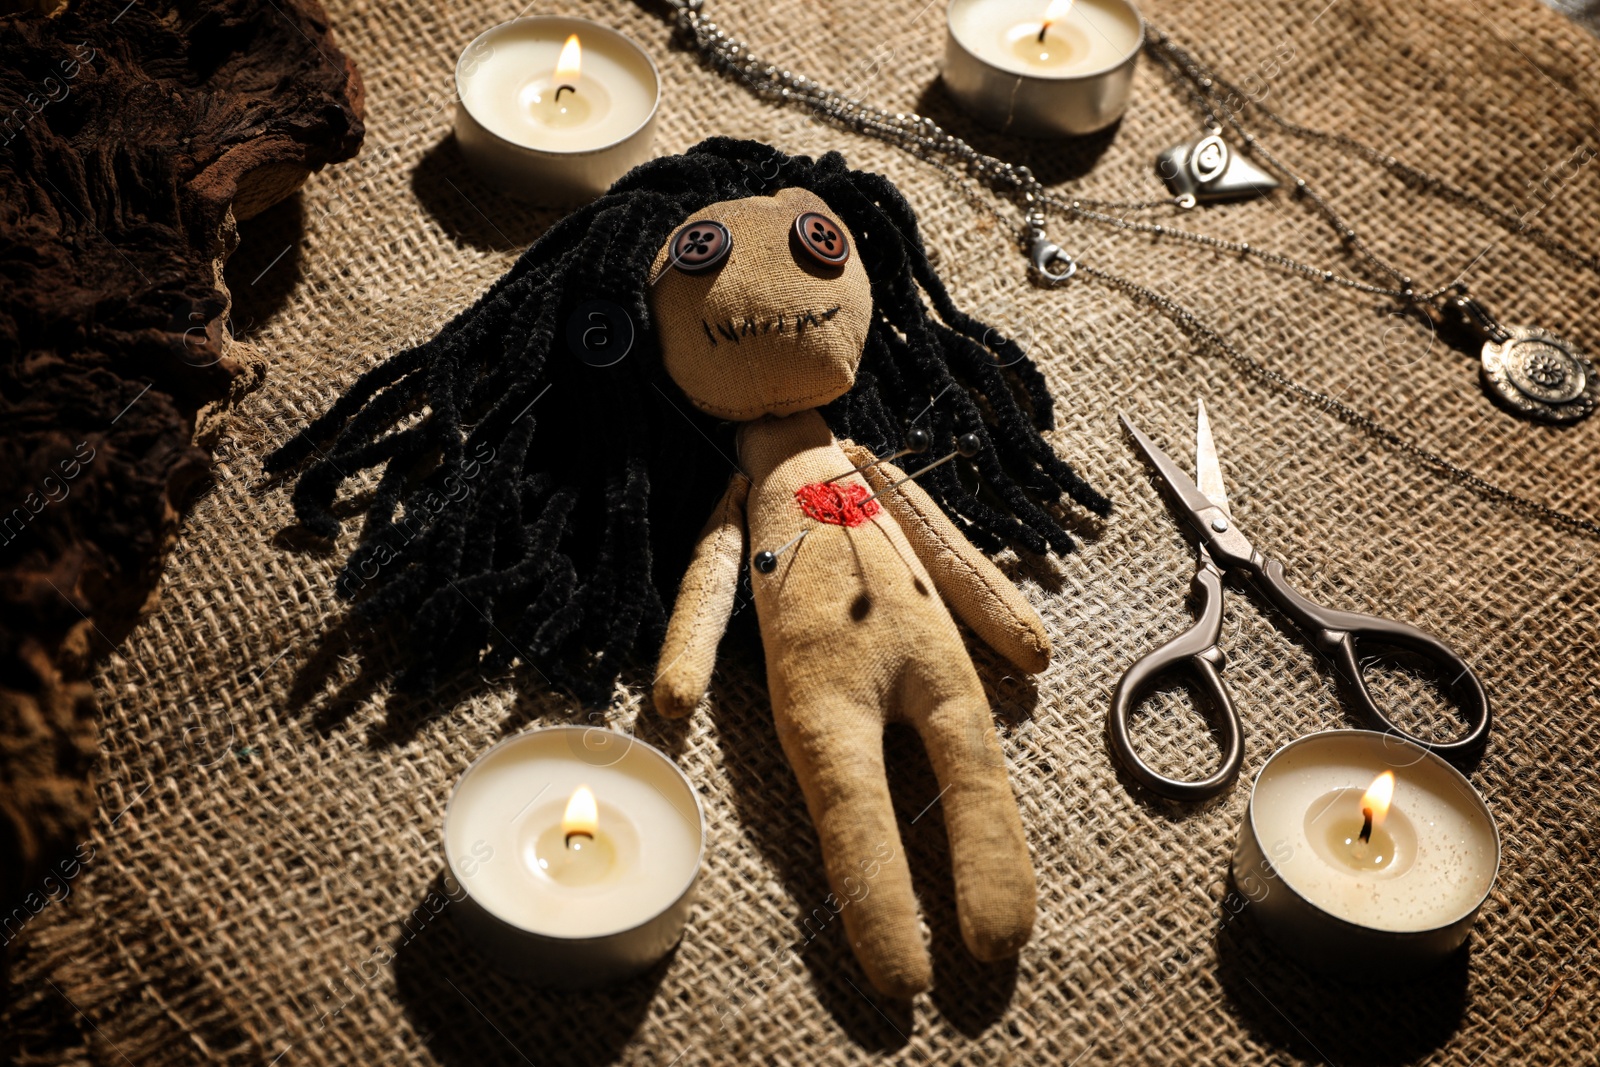 Photo of Voodoo doll with pins surrounded by ceremonial items on burlap fabric